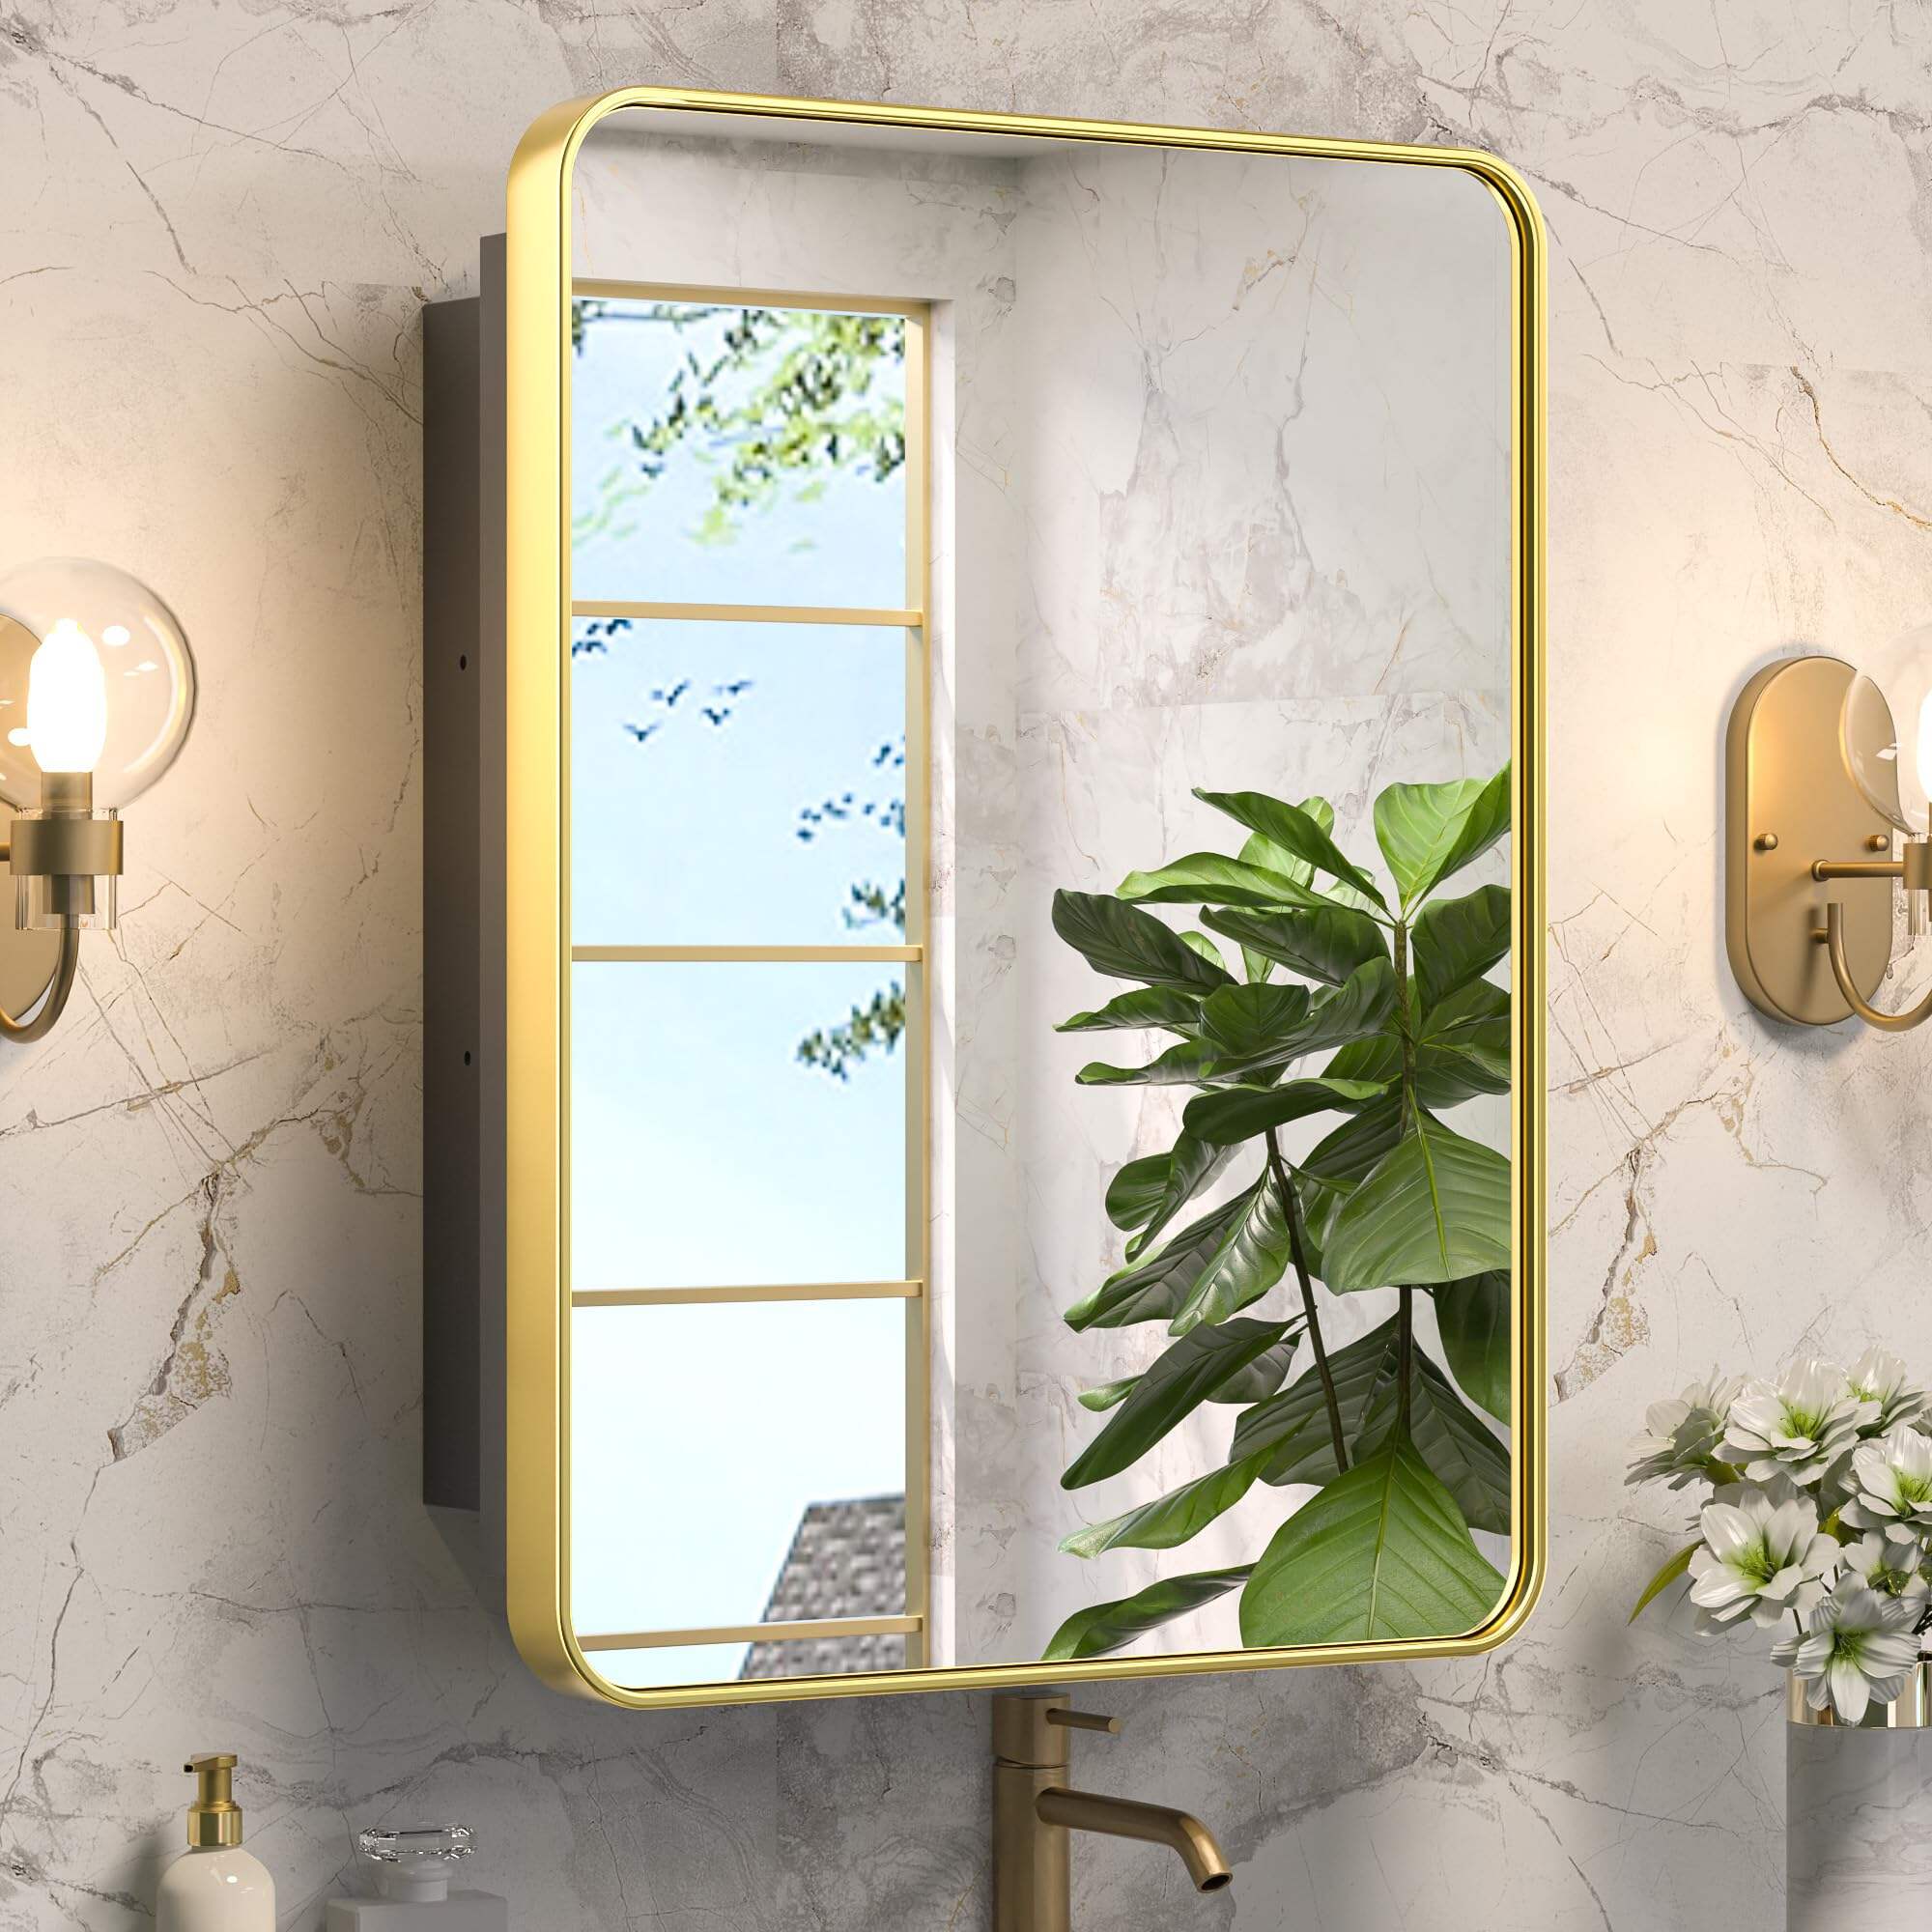 Foshan Haohan Smart Home Co., Ltd. 20 x 26 Inch Gold Recessed Medicine Cabinets for Bathroom with Vanity Mirror Stainless Steel Rounded Rectangle Framed Single Door Surface Wall Mounted Metal Mirrored Bathroom Storage Cabinet